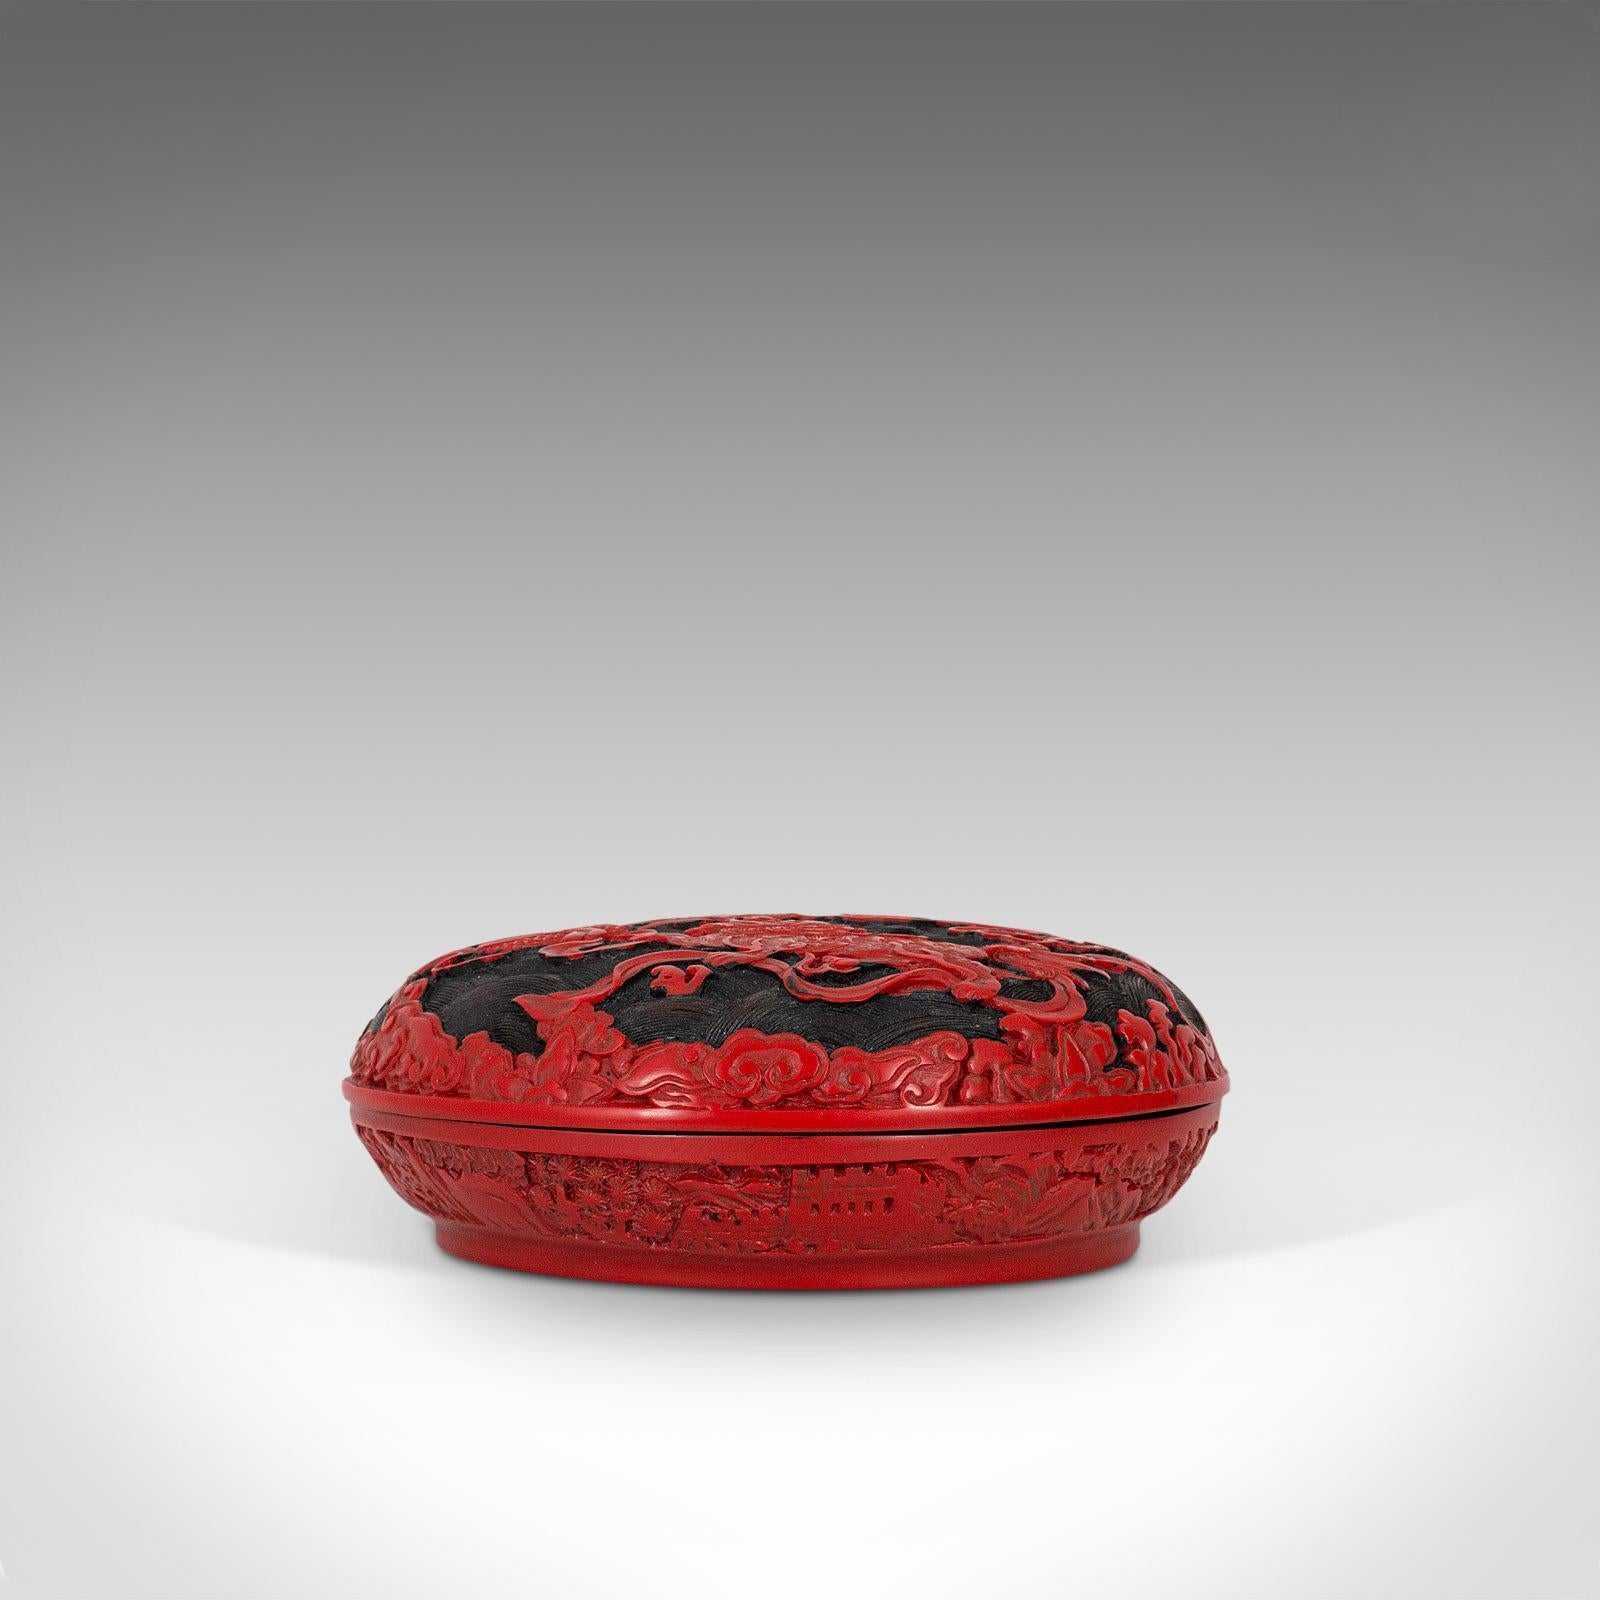 This is an antique circular box. A Chinese, carved cinnabar lacquer decorative lidded tray, dating to the late Qing dynasty, circa 1900.

Superb example of the Chinese decorative arts
Displays a desirable aged patina - in very good